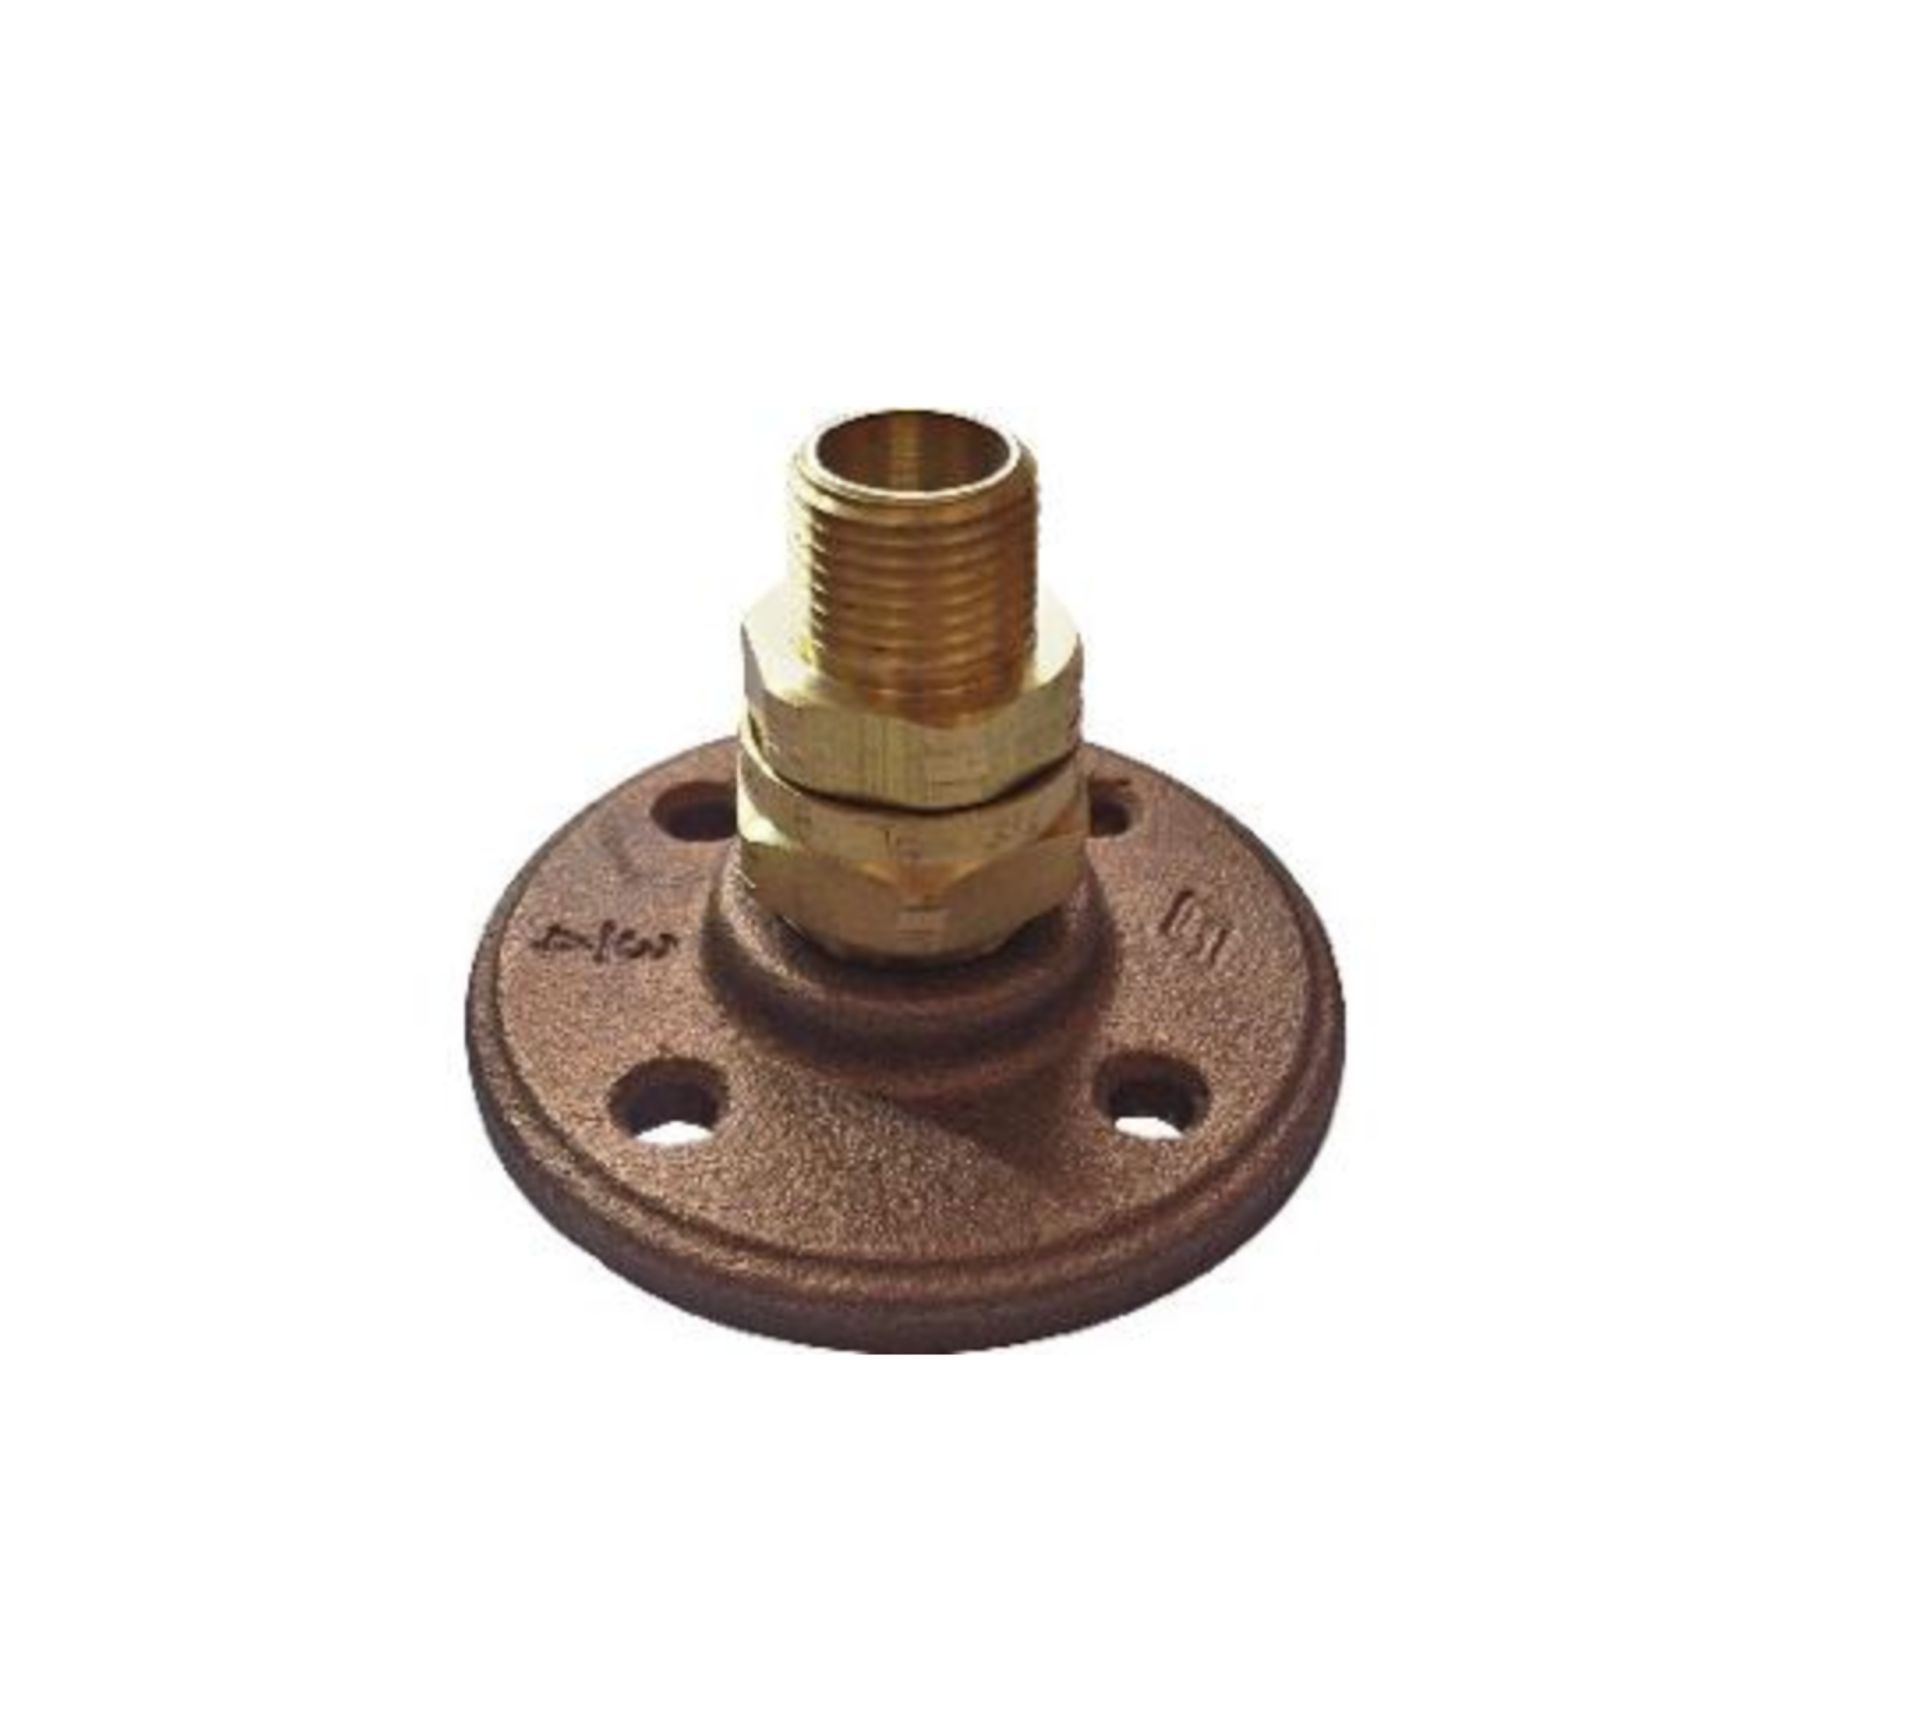 12 BRAND NEW 3/4" Termination Fitting - Round Bronze Flange Gas Fitting NEW - Image 2 of 2